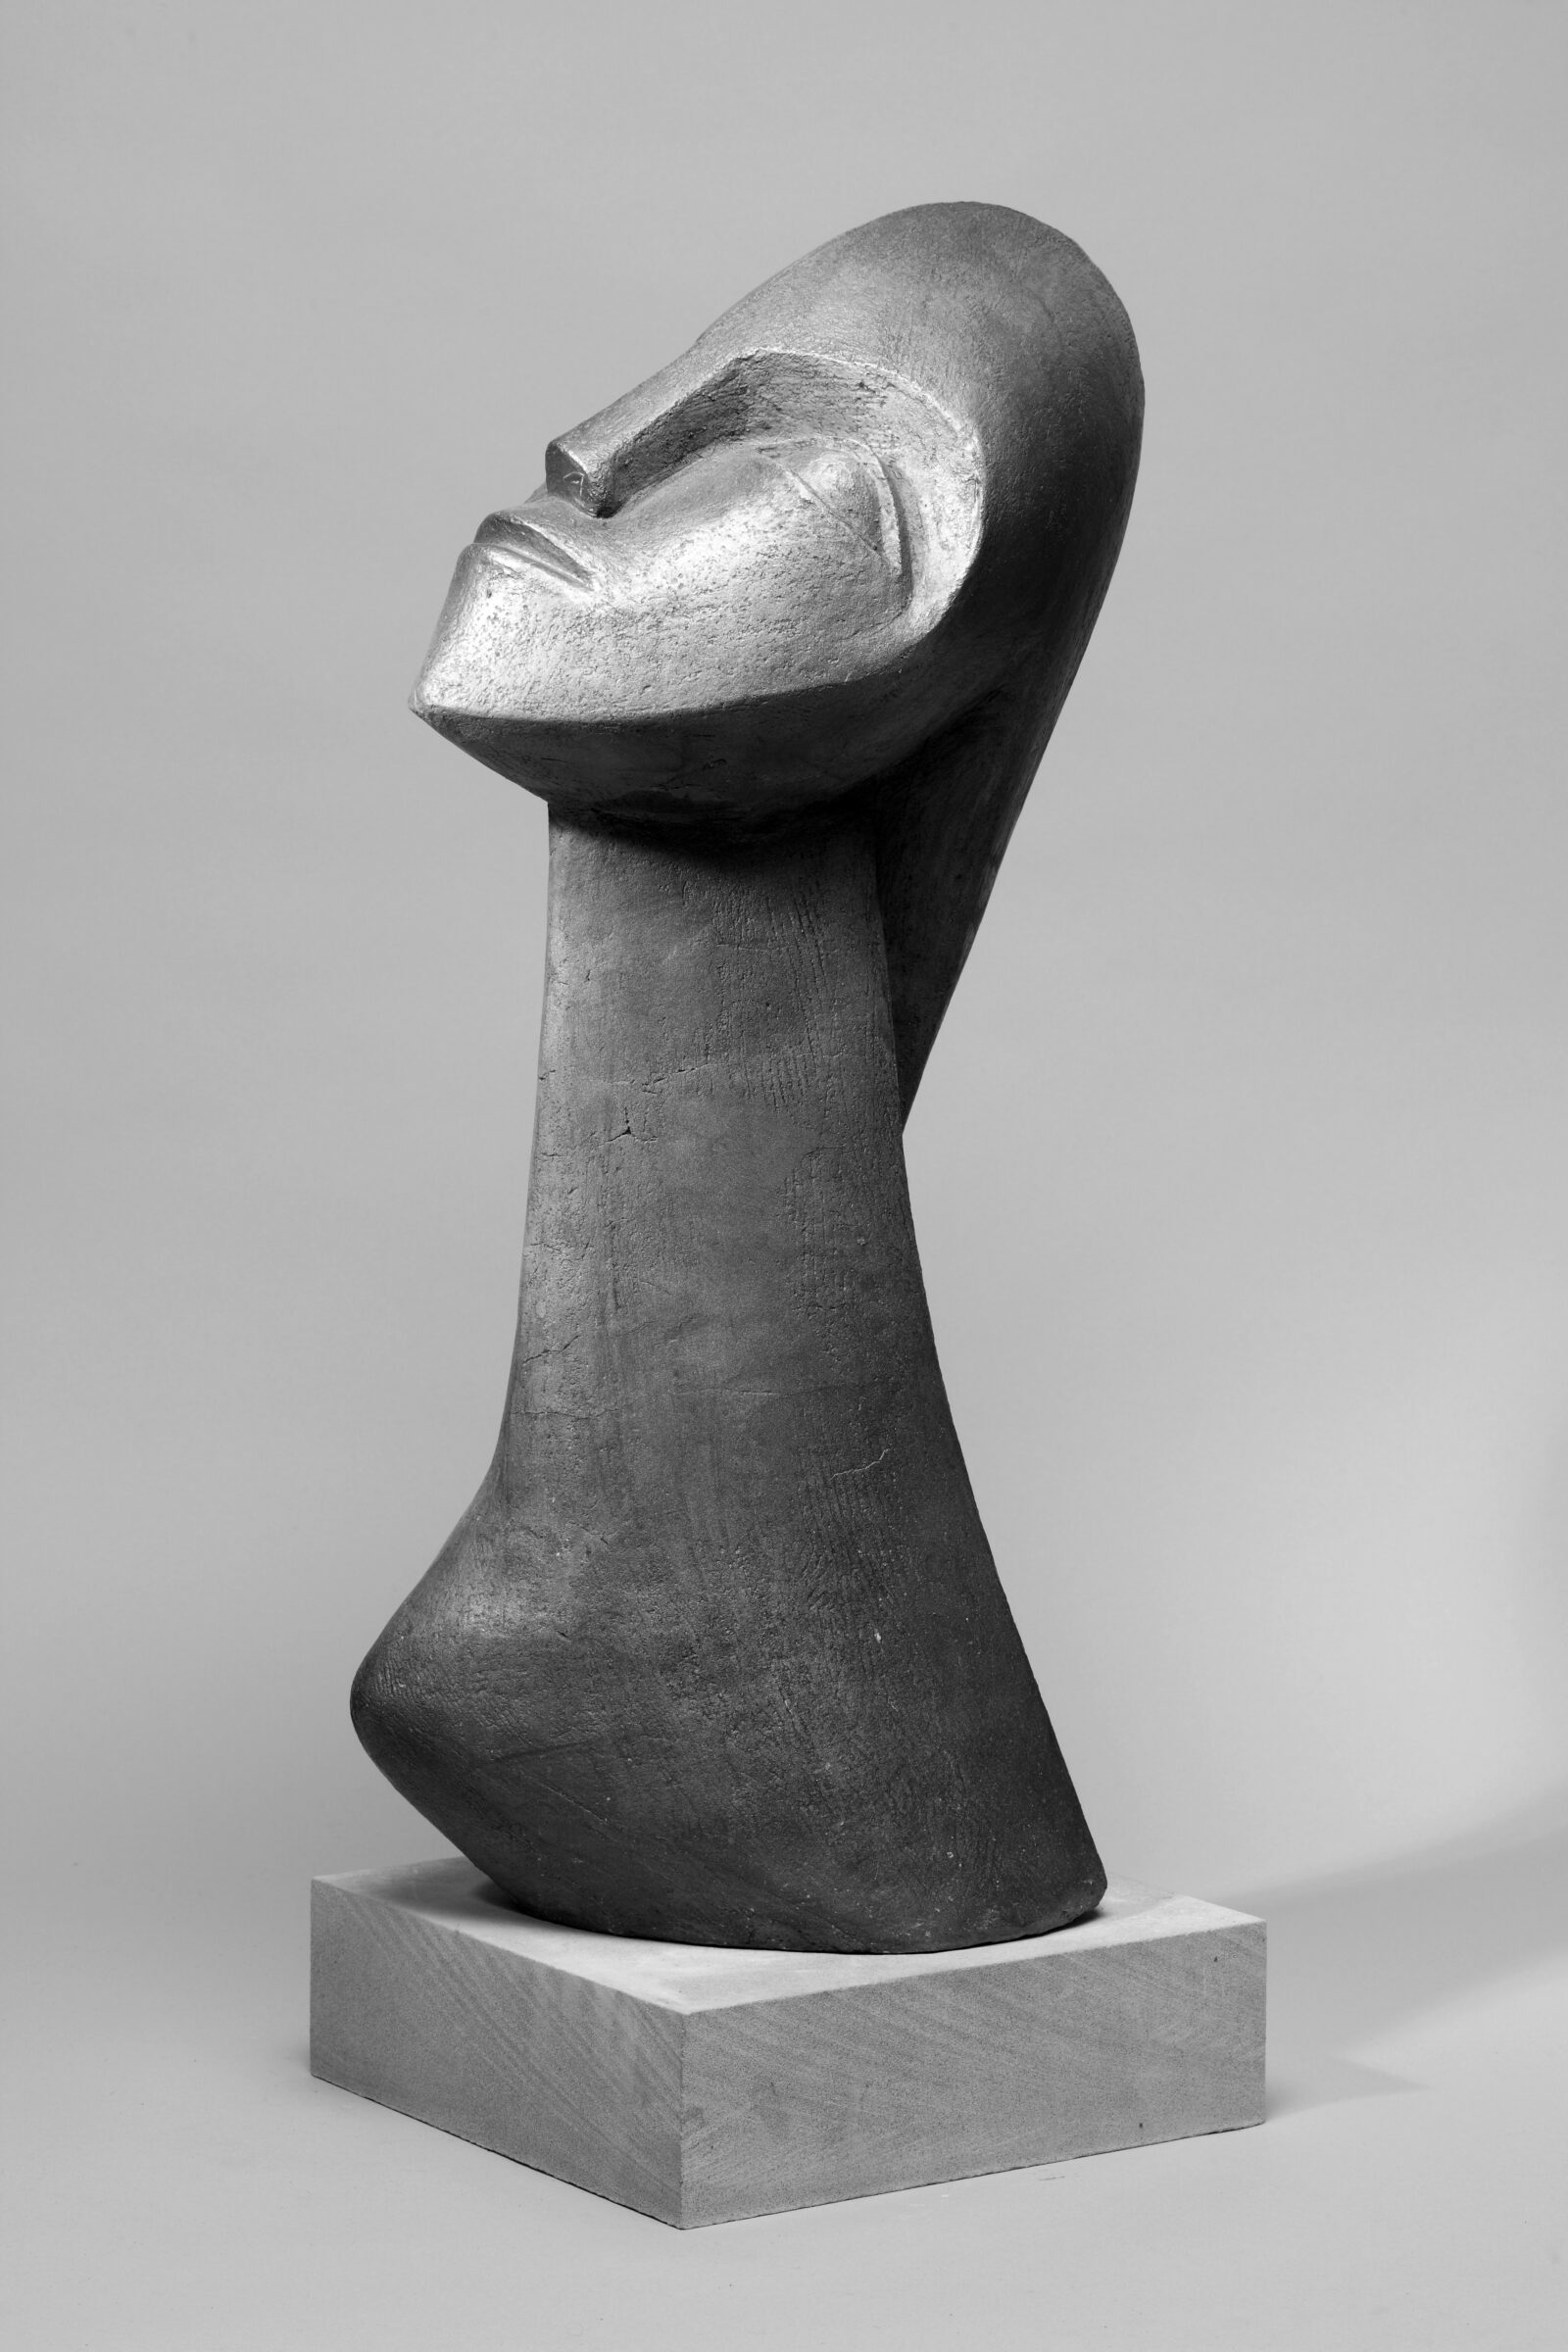 modernist ceramic sculpture of head inspired by Picasso and African carving